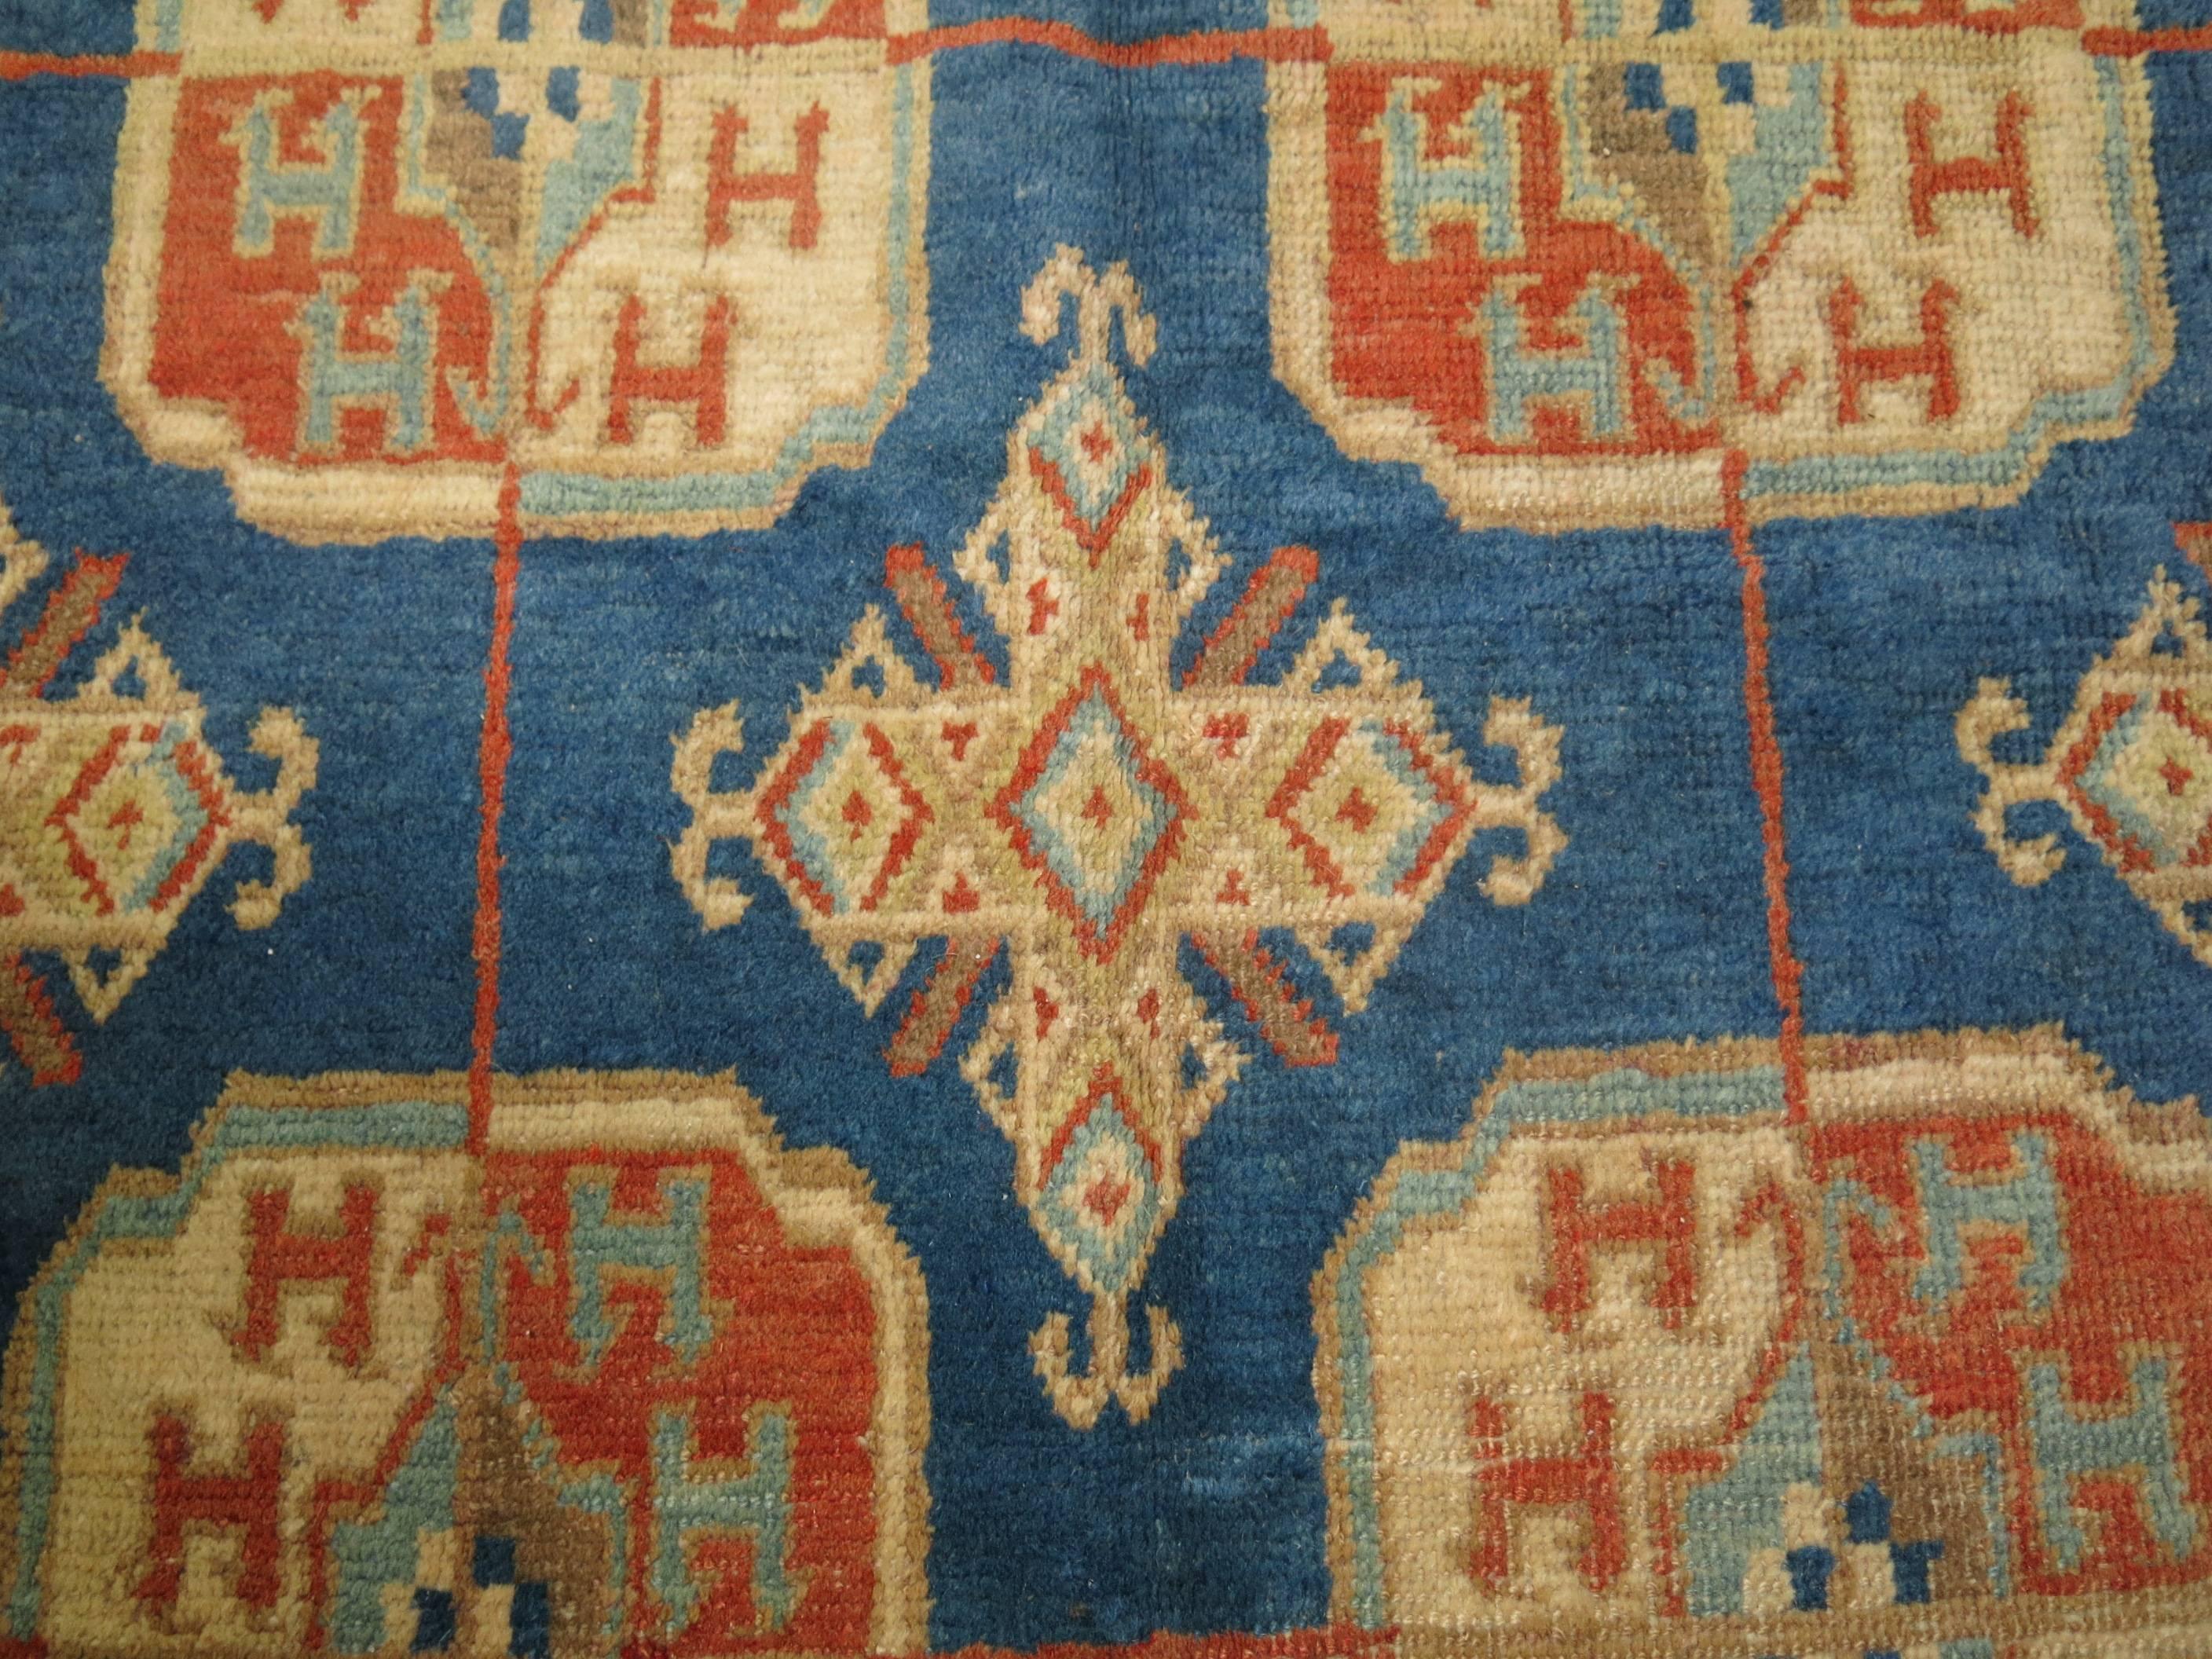 An authentic one of a kind Full Pile condtion Khotan rug. Untouched and in magnificent shape.

6'11'' x 12'10''